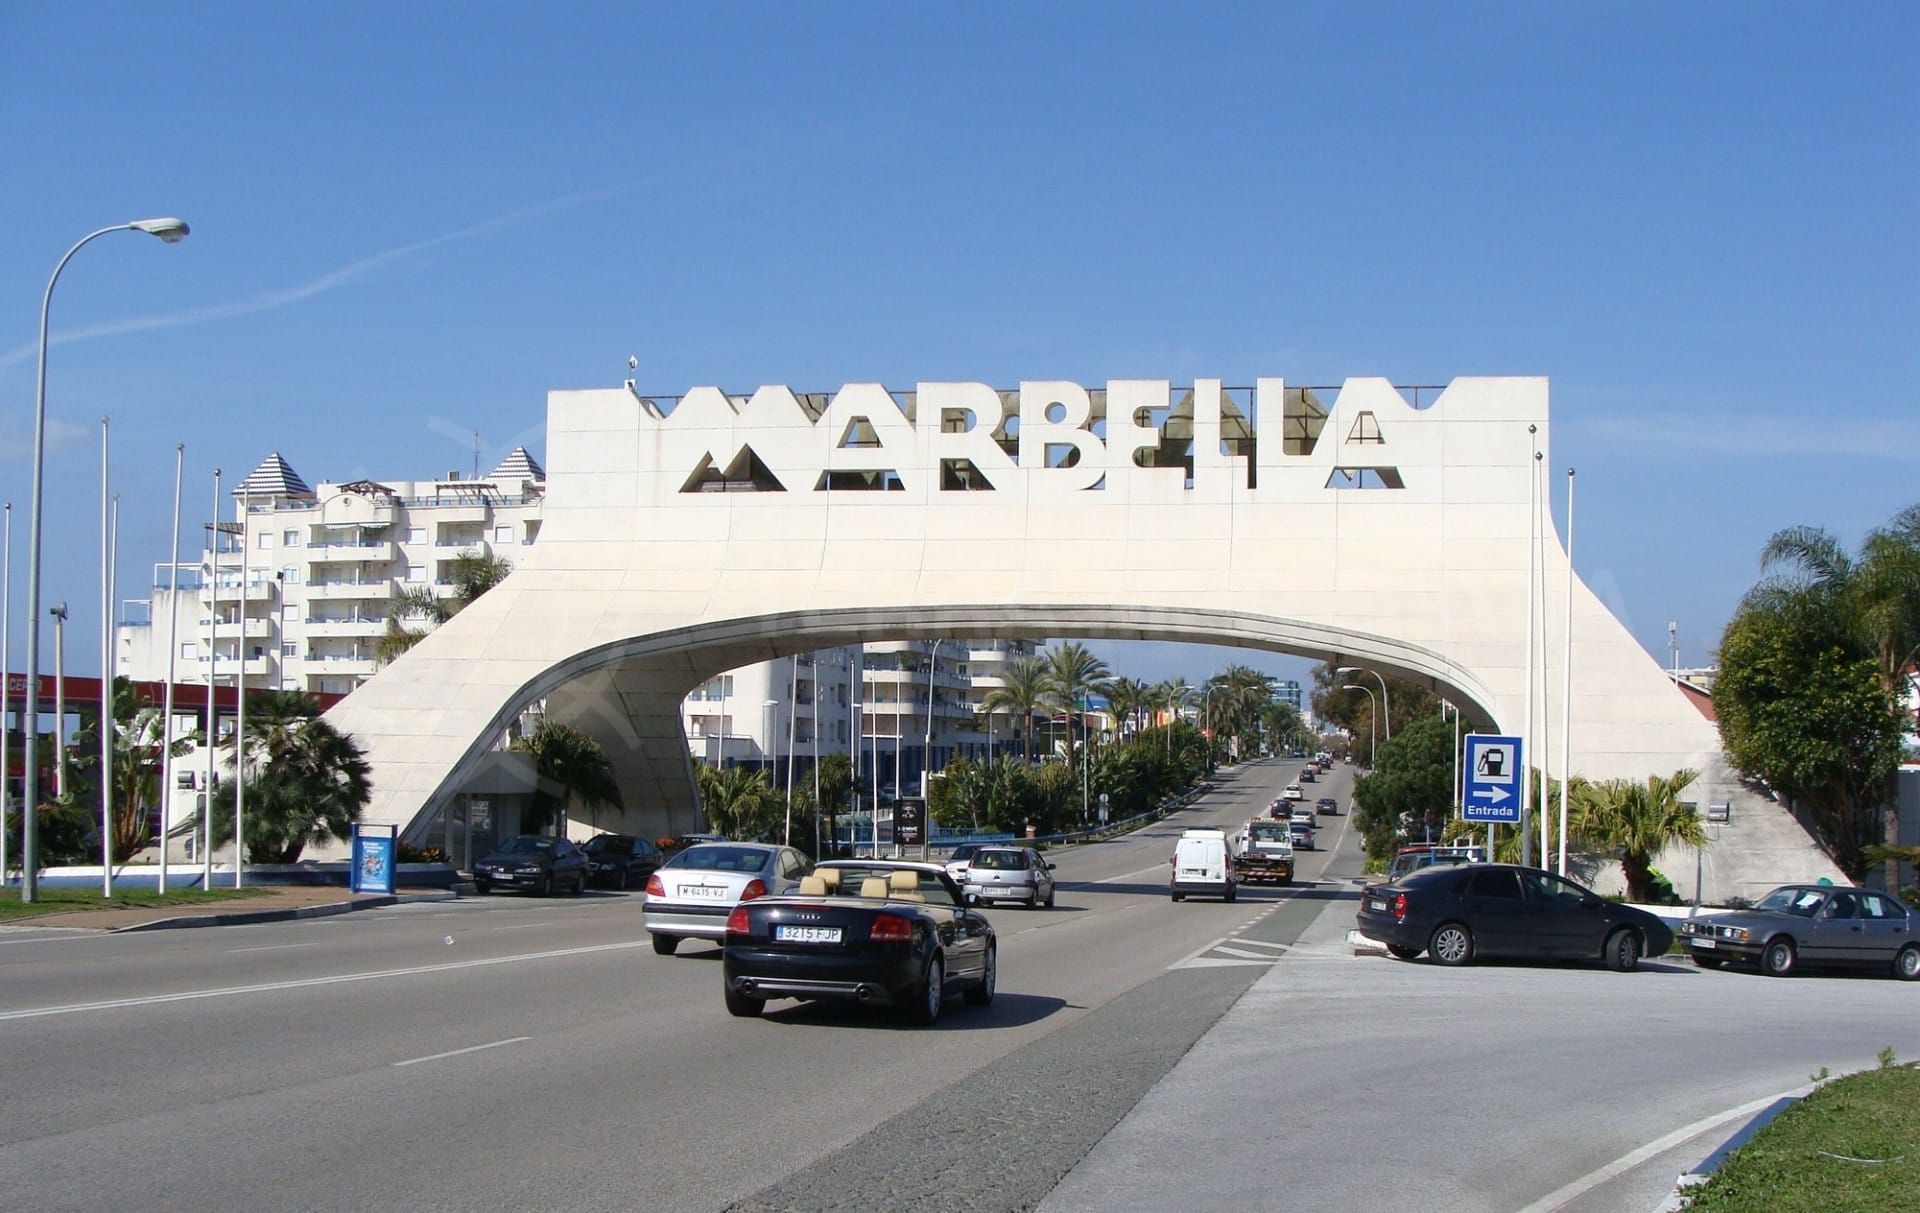 Back to the past: Supreme Court leaves Marbella without a town plan